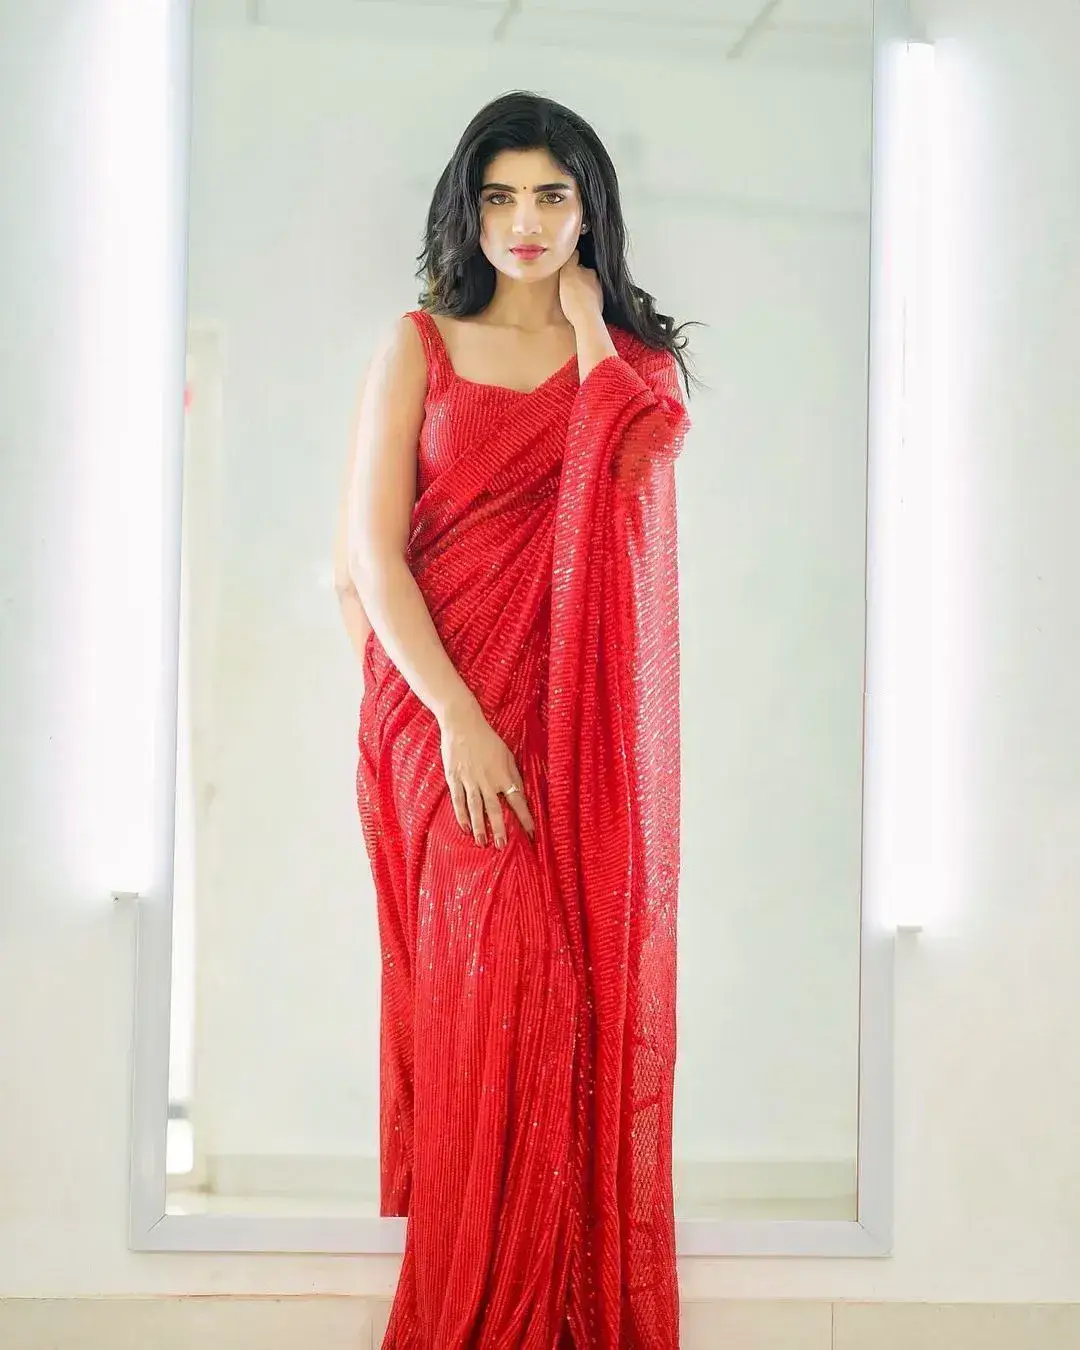 INDIAN ACTRESS JABARDASTH VARSHA IMAGES IN RED COLOUR SAREE 3